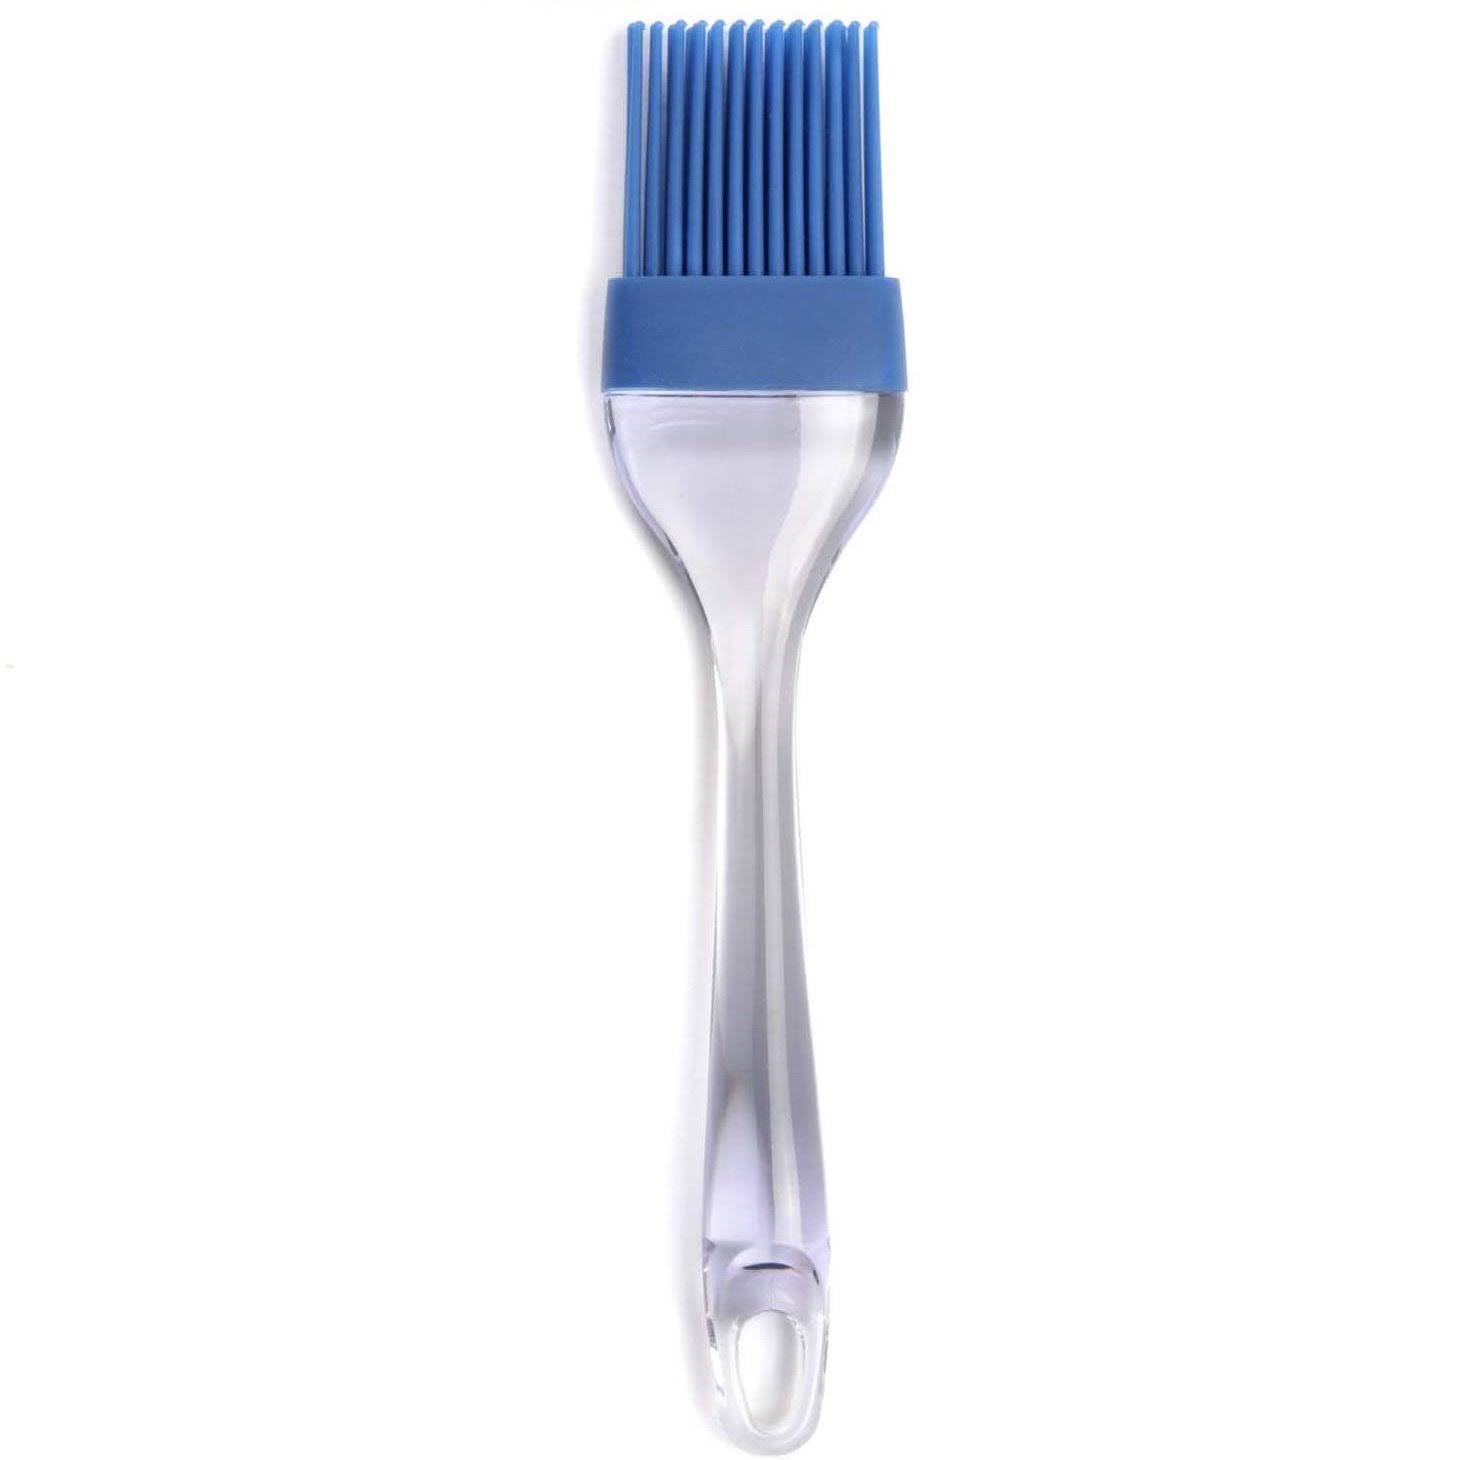 Norpro Silicone Basting or Pastry Brush - 22.9cm